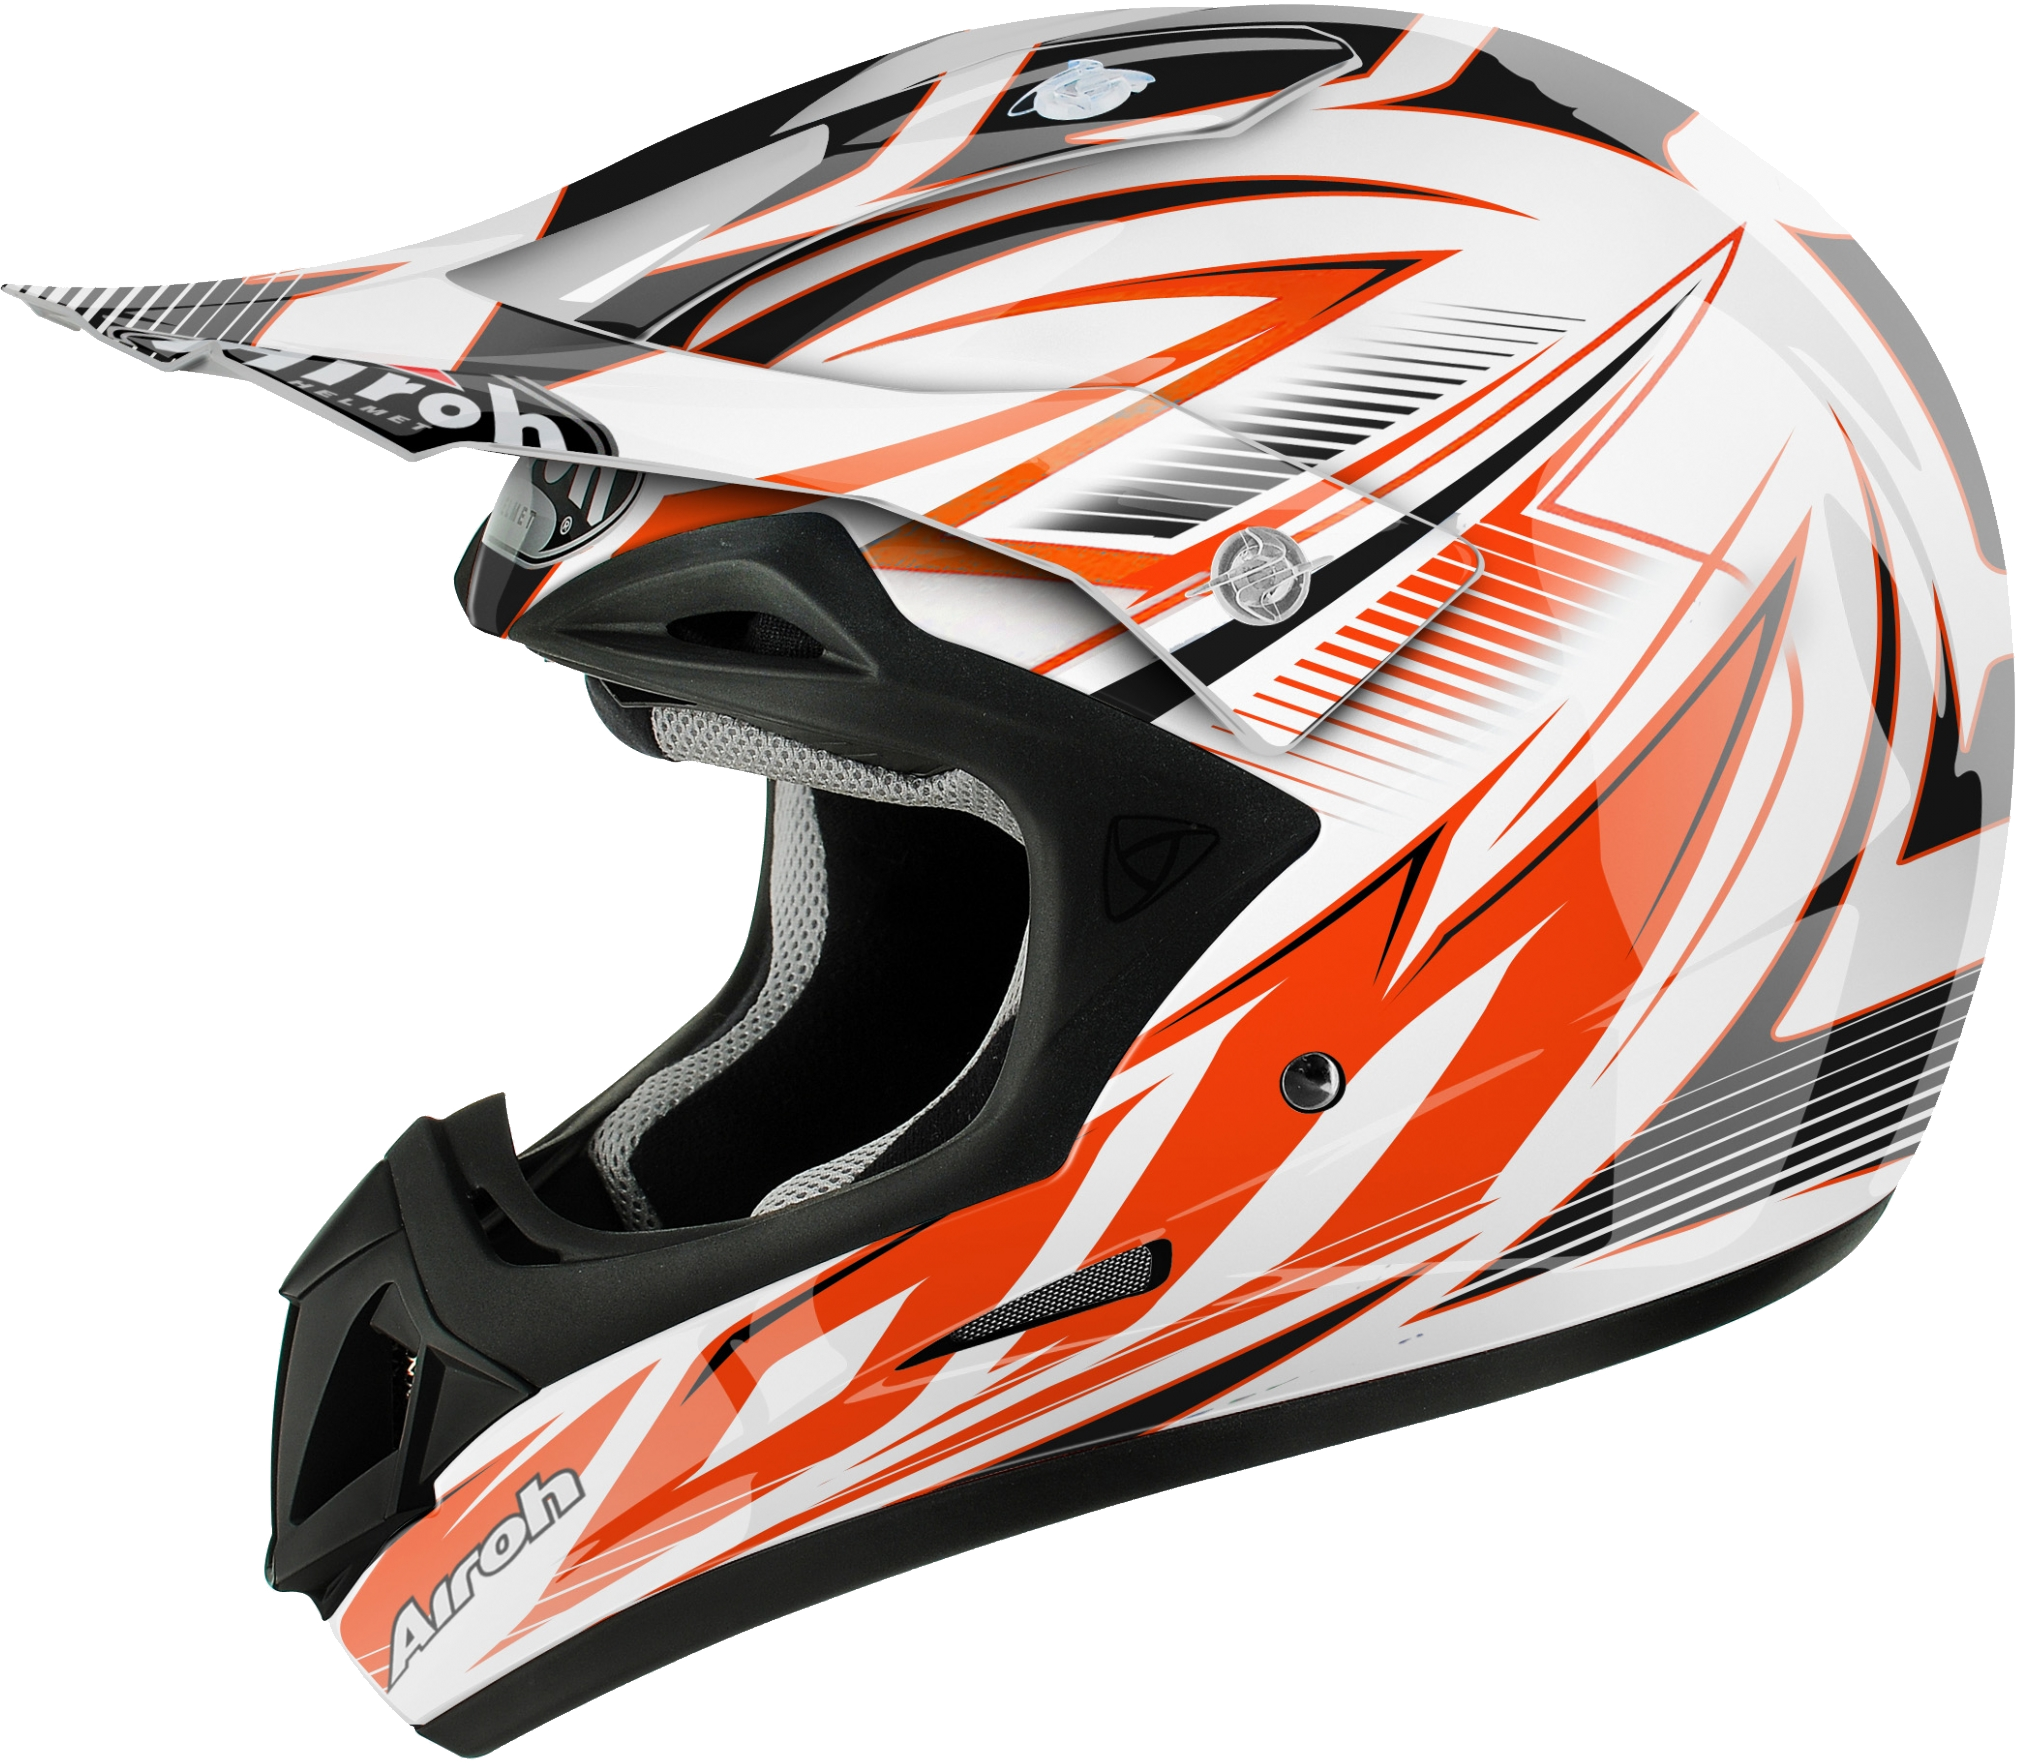 Full Face Bicycle Helmet Png Image - Motorcycle Helmet, Transparent background PNG HD thumbnail